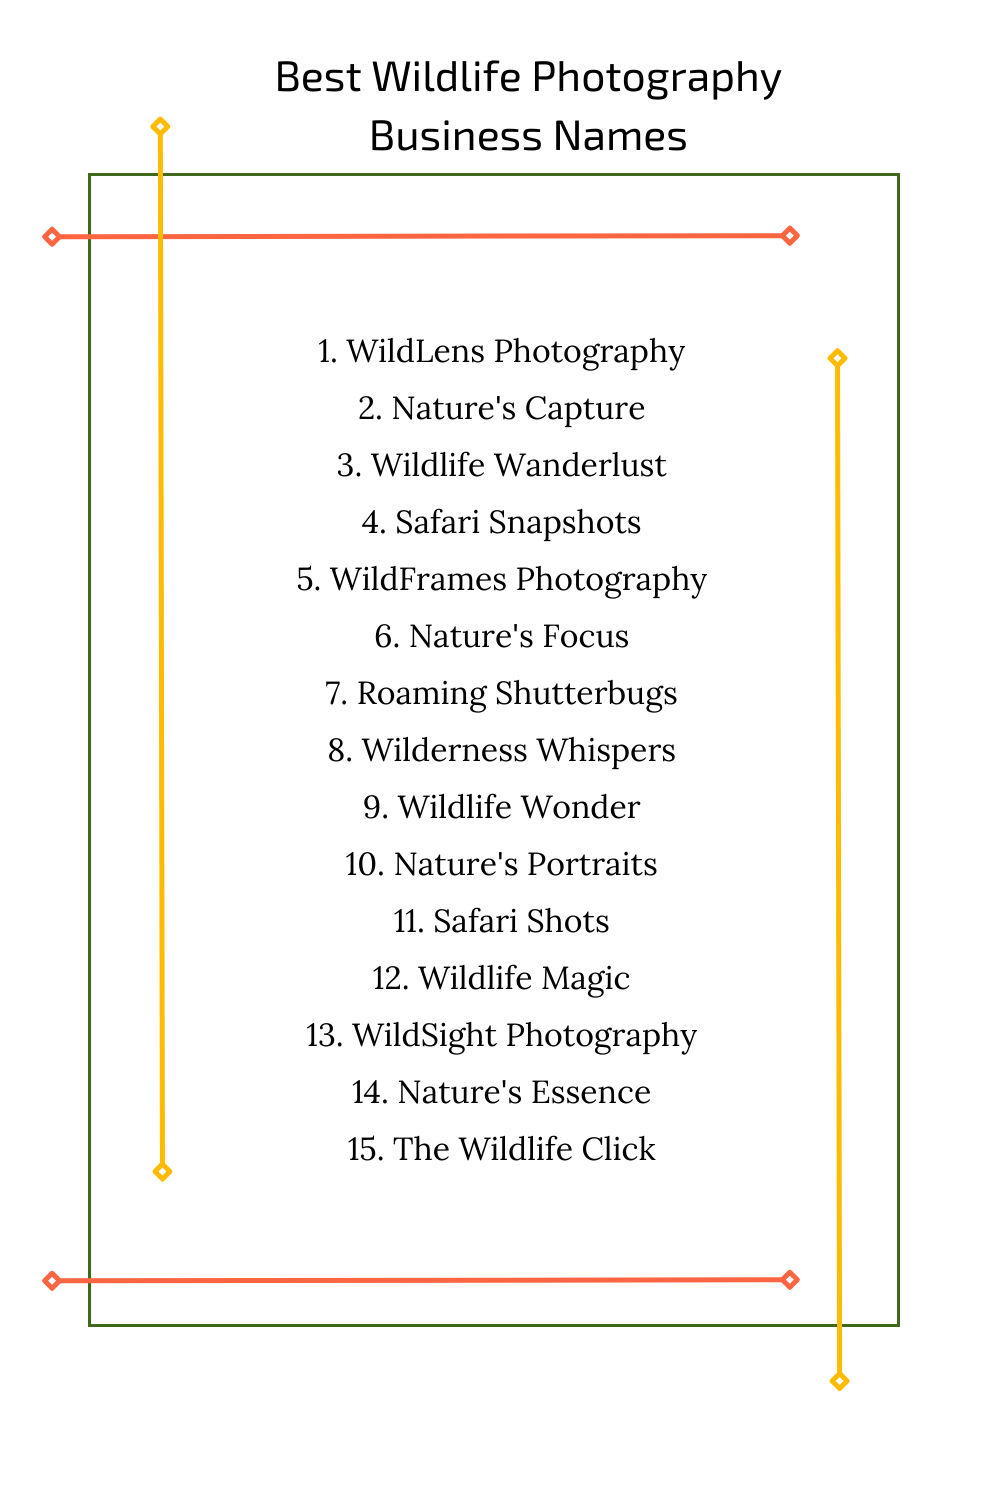 Best Wildlife Photography Business Names